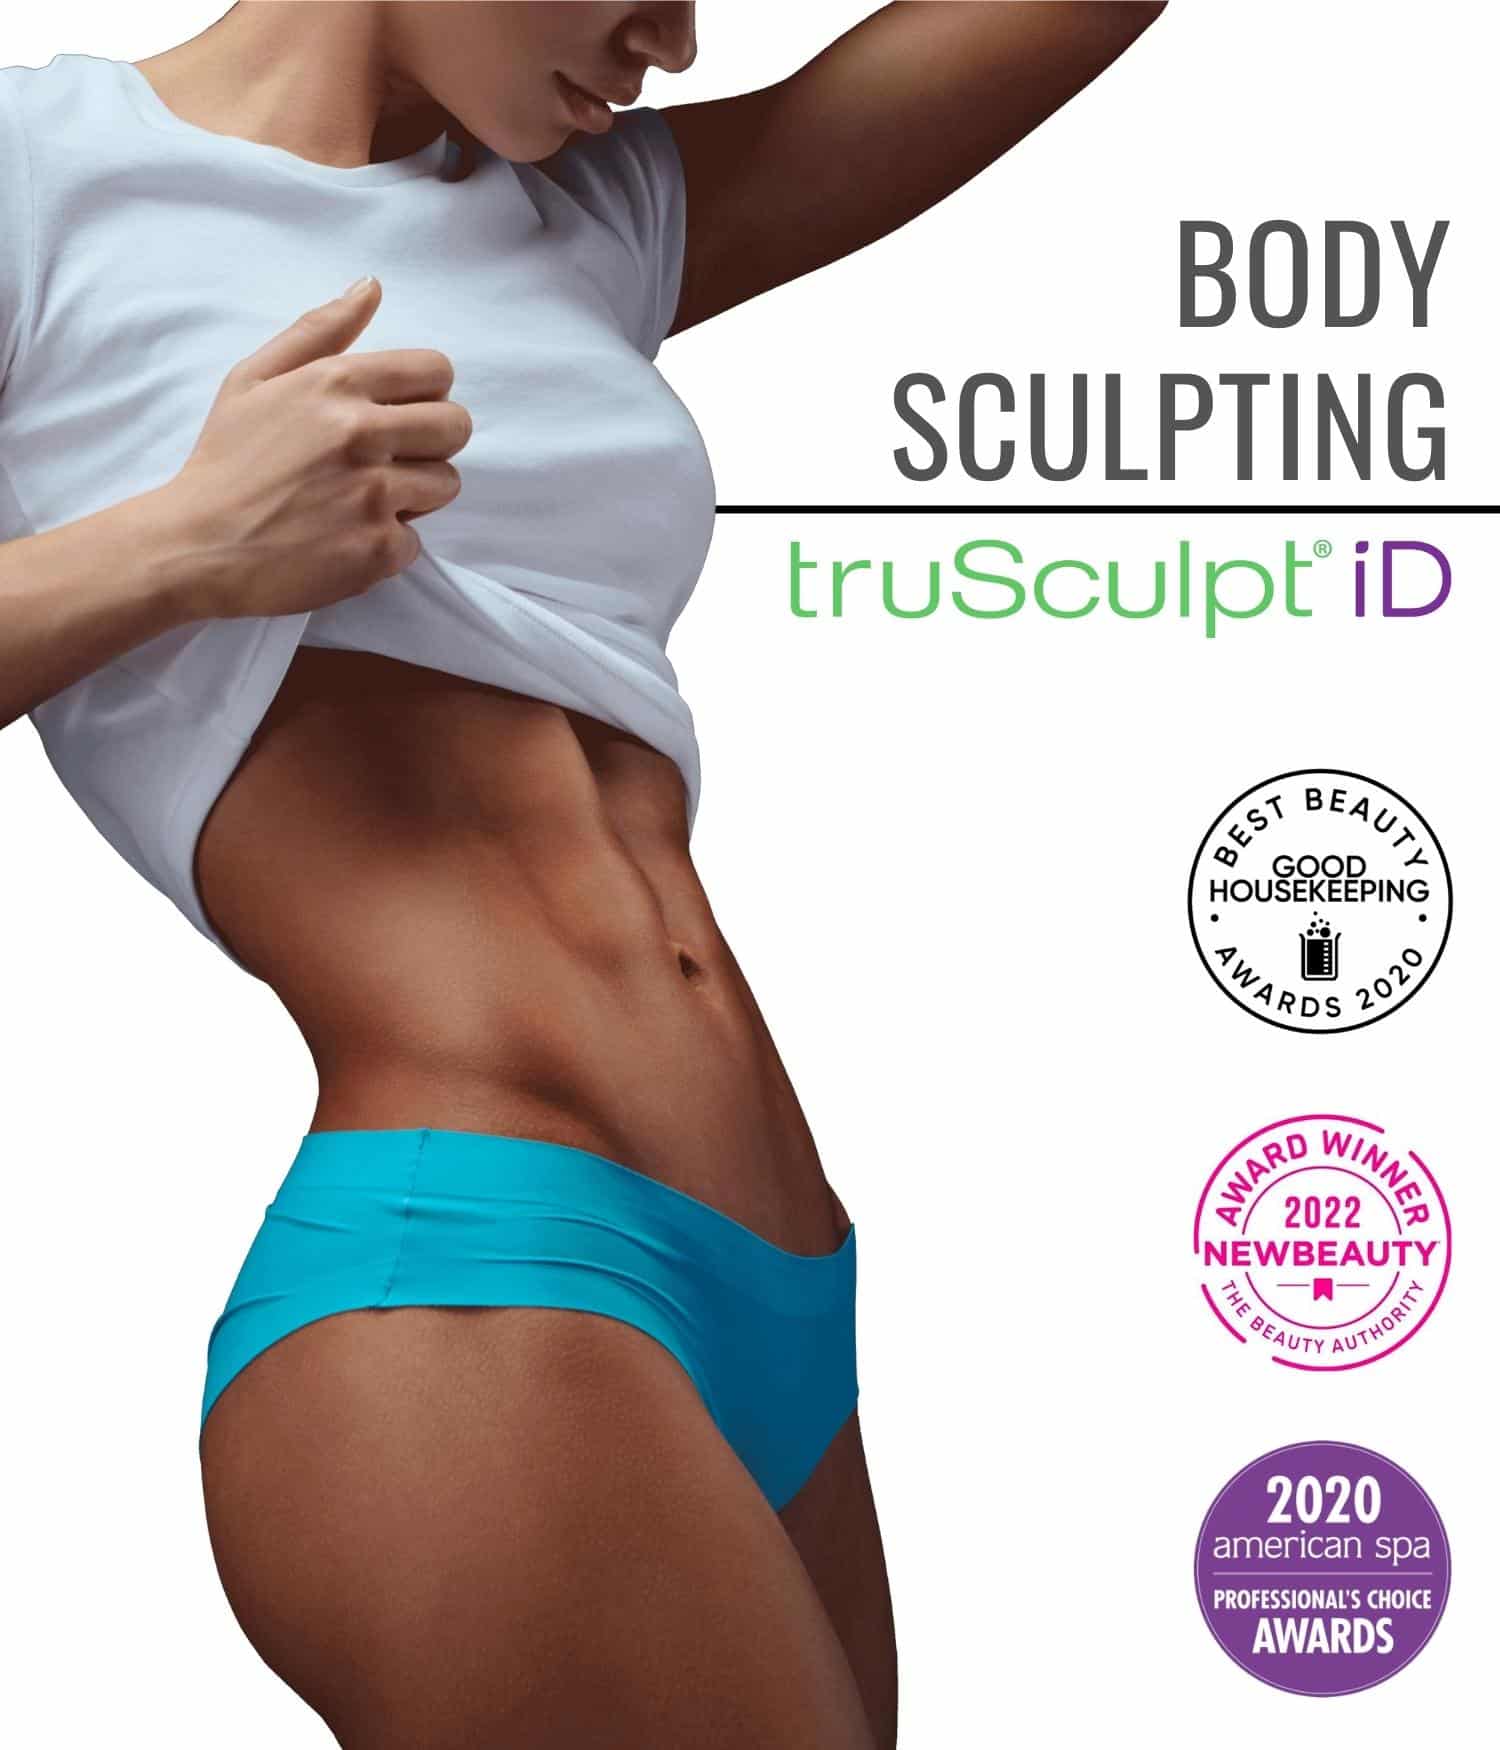 Fitness woman with her flat belly promoting TruSculpt iD.